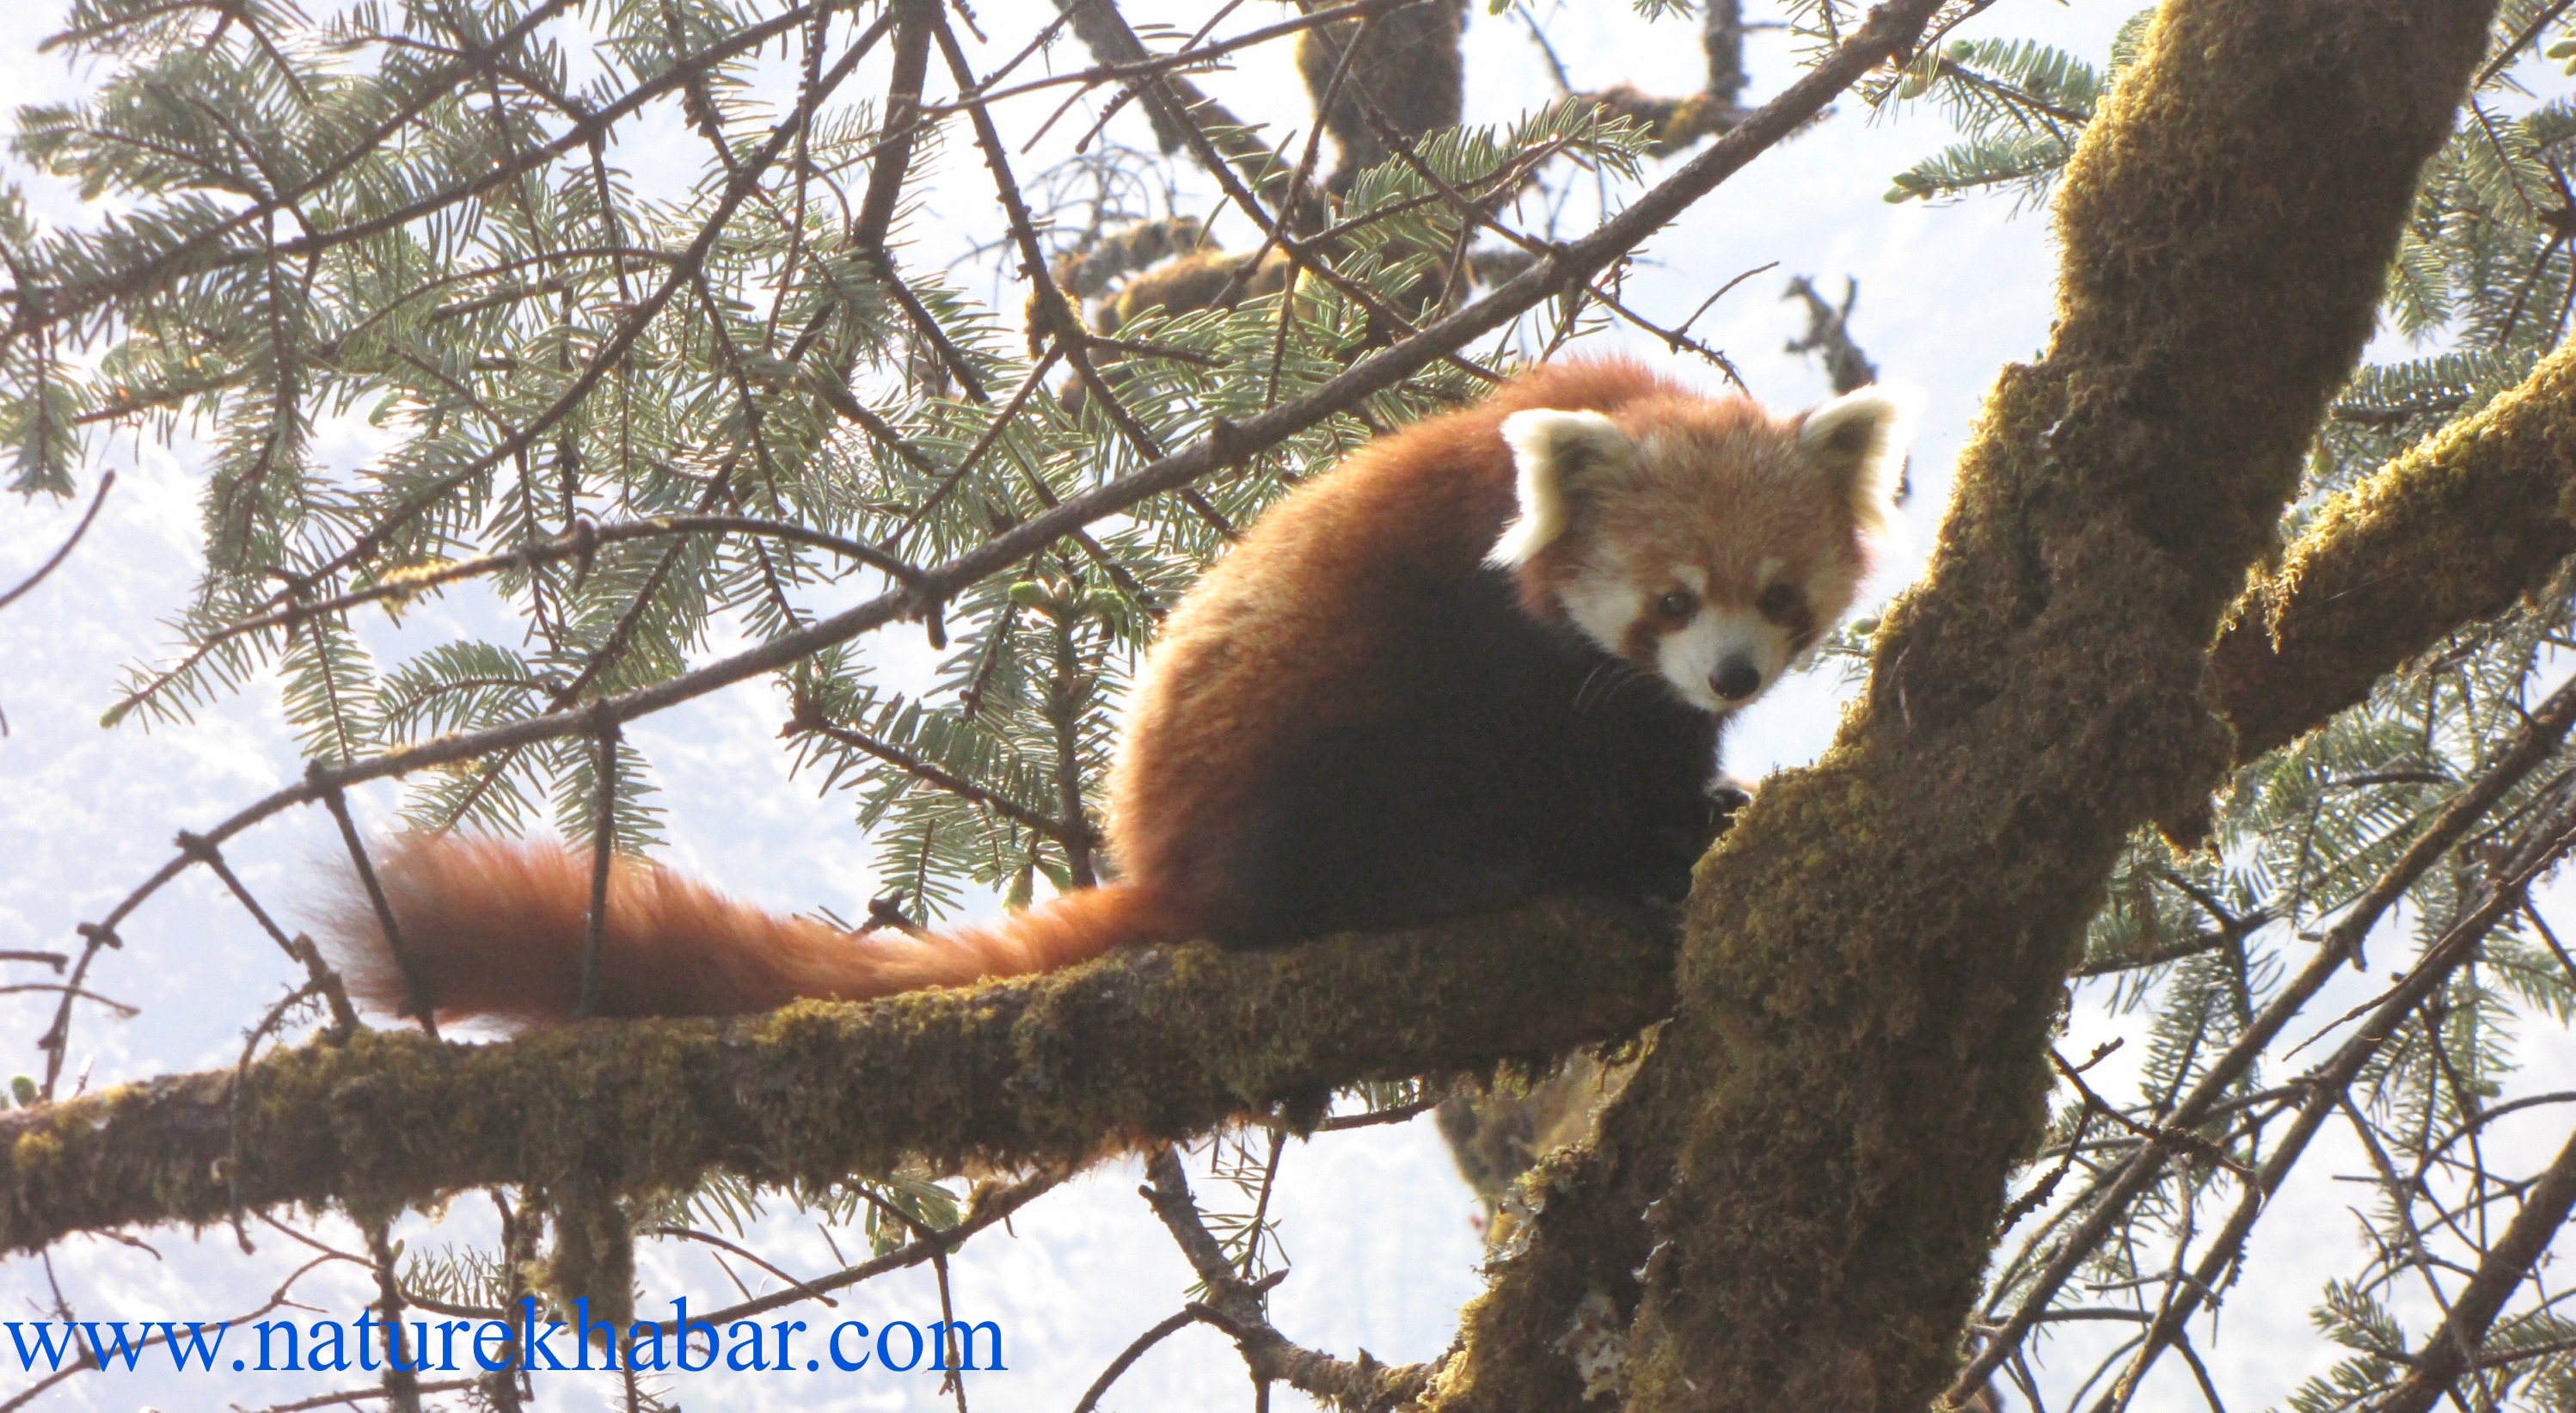 Local People have closed Jungle for red panda's breeding season - Nature Khabar